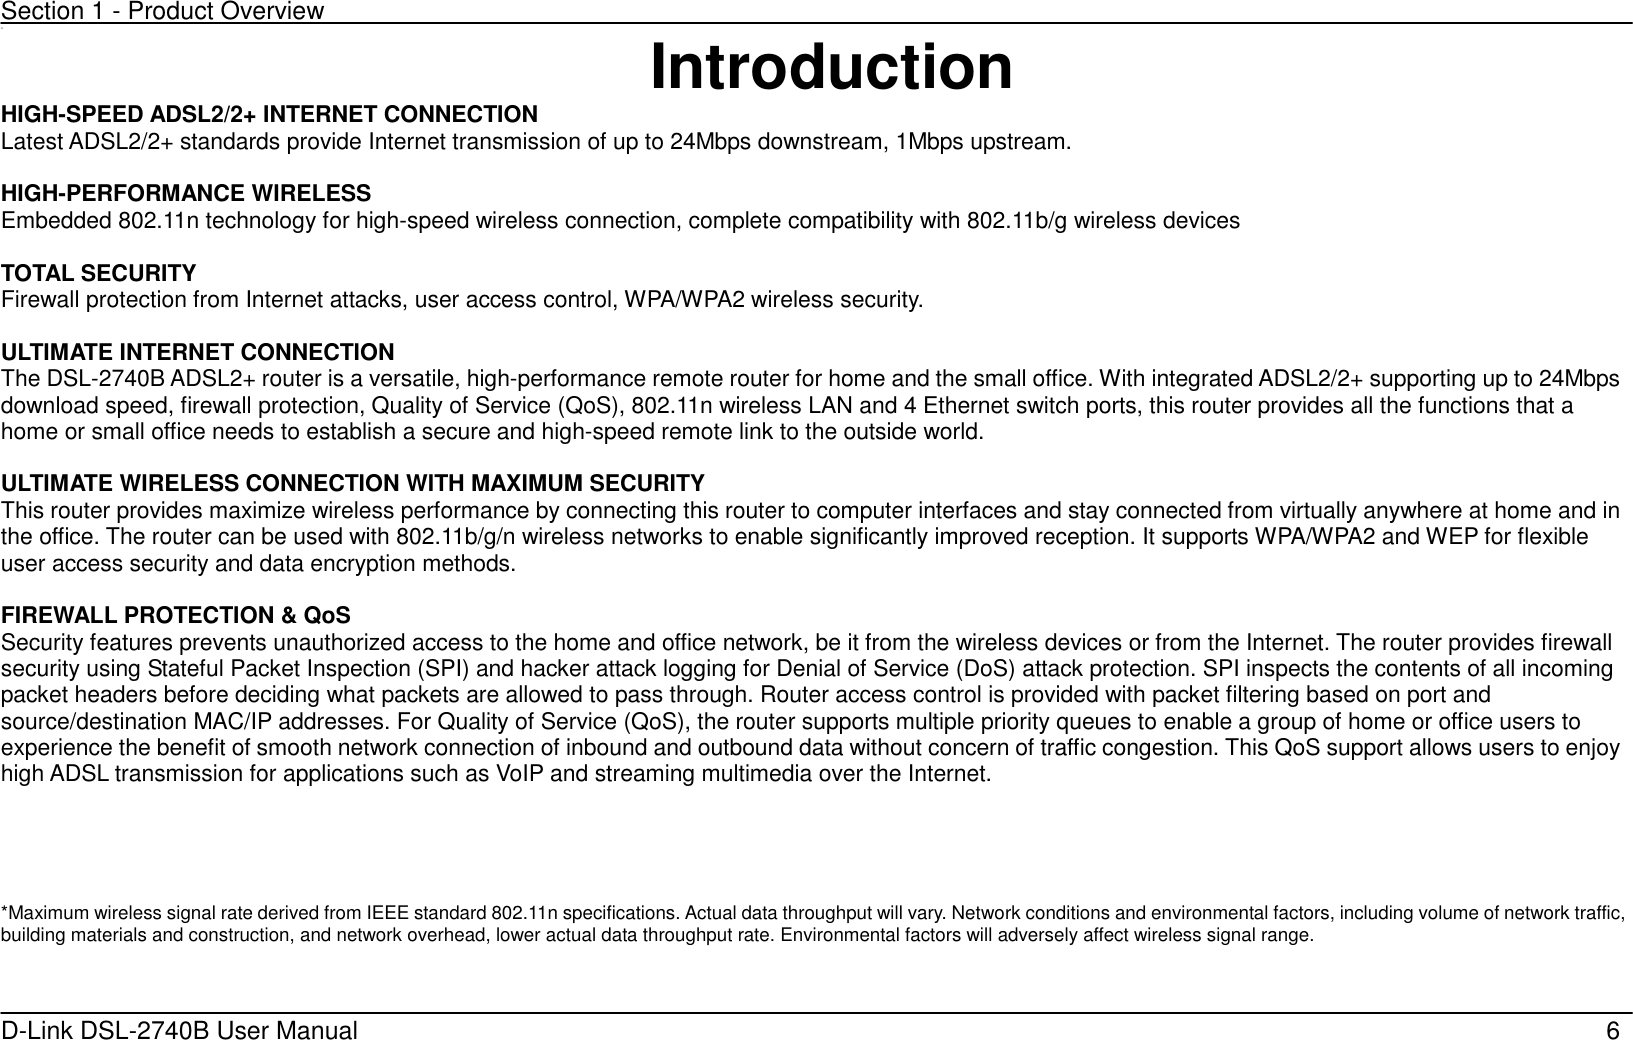 Section 1 - Product Overview D-Link DSL-2740B User Manual                                                  6 11 Introduction HIGH-SPEED ADSL2/2+ INTERNET CONNECTION Latest ADSL2/2+ standards provide Internet transmission of up to 24Mbps downstream, 1Mbps upstream.  HIGH-PERFORMANCE WIRELESS Embedded 802.11n technology for high-speed wireless connection, complete compatibility with 802.11b/g wireless devices  TOTAL SECURITY Firewall protection from Internet attacks, user access control, WPA/WPA2 wireless security.  ULTIMATE INTERNET CONNECTION   The DSL-2740B ADSL2+ router is a versatile, high-performance remote router for home and the small office. With integrated ADSL2/2+ supporting up to 24Mbps download speed, firewall protection, Quality of Service (QoS), 802.11n wireless LAN and 4 Ethernet switch ports, this router provides all the functions that a home or small office needs to establish a secure and high-speed remote link to the outside world.  ULTIMATE WIRELESS CONNECTION WITH MAXIMUM SECURITY This router provides maximize wireless performance by connecting this router to computer interfaces and stay connected from virtually anywhere at home and in the office. The router can be used with 802.11b/g/n wireless networks to enable significantly improved reception. It supports WPA/WPA2 and WEP for flexible user access security and data encryption methods.  FIREWALL PROTECTION &amp; QoS Security features prevents unauthorized access to the home and office network, be it from the wireless devices or from the Internet. The router provides firewall security using Stateful Packet Inspection (SPI) and hacker attack logging for Denial of Service (DoS) attack protection. SPI inspects the contents of all incoming packet headers before deciding what packets are allowed to pass through. Router access control is provided with packet filtering based on port and source/destination MAC/IP addresses. For Quality of Service (QoS), the router supports multiple priority queues to enable a group of home or office users to experience the benefit of smooth network connection of inbound and outbound data without concern of traffic congestion. This QoS support allows users to enjoy high ADSL transmission for applications such as VoIP and streaming multimedia over the Internet.       *Maximum wireless signal rate derived from IEEE standard 802.11n specifications. Actual data throughput will vary. Network conditions and environmental factors, including volume of network traffic, building materials and construction, and network overhead, lower actual data throughput rate. Environmental factors will adversely affect wireless signal range.  